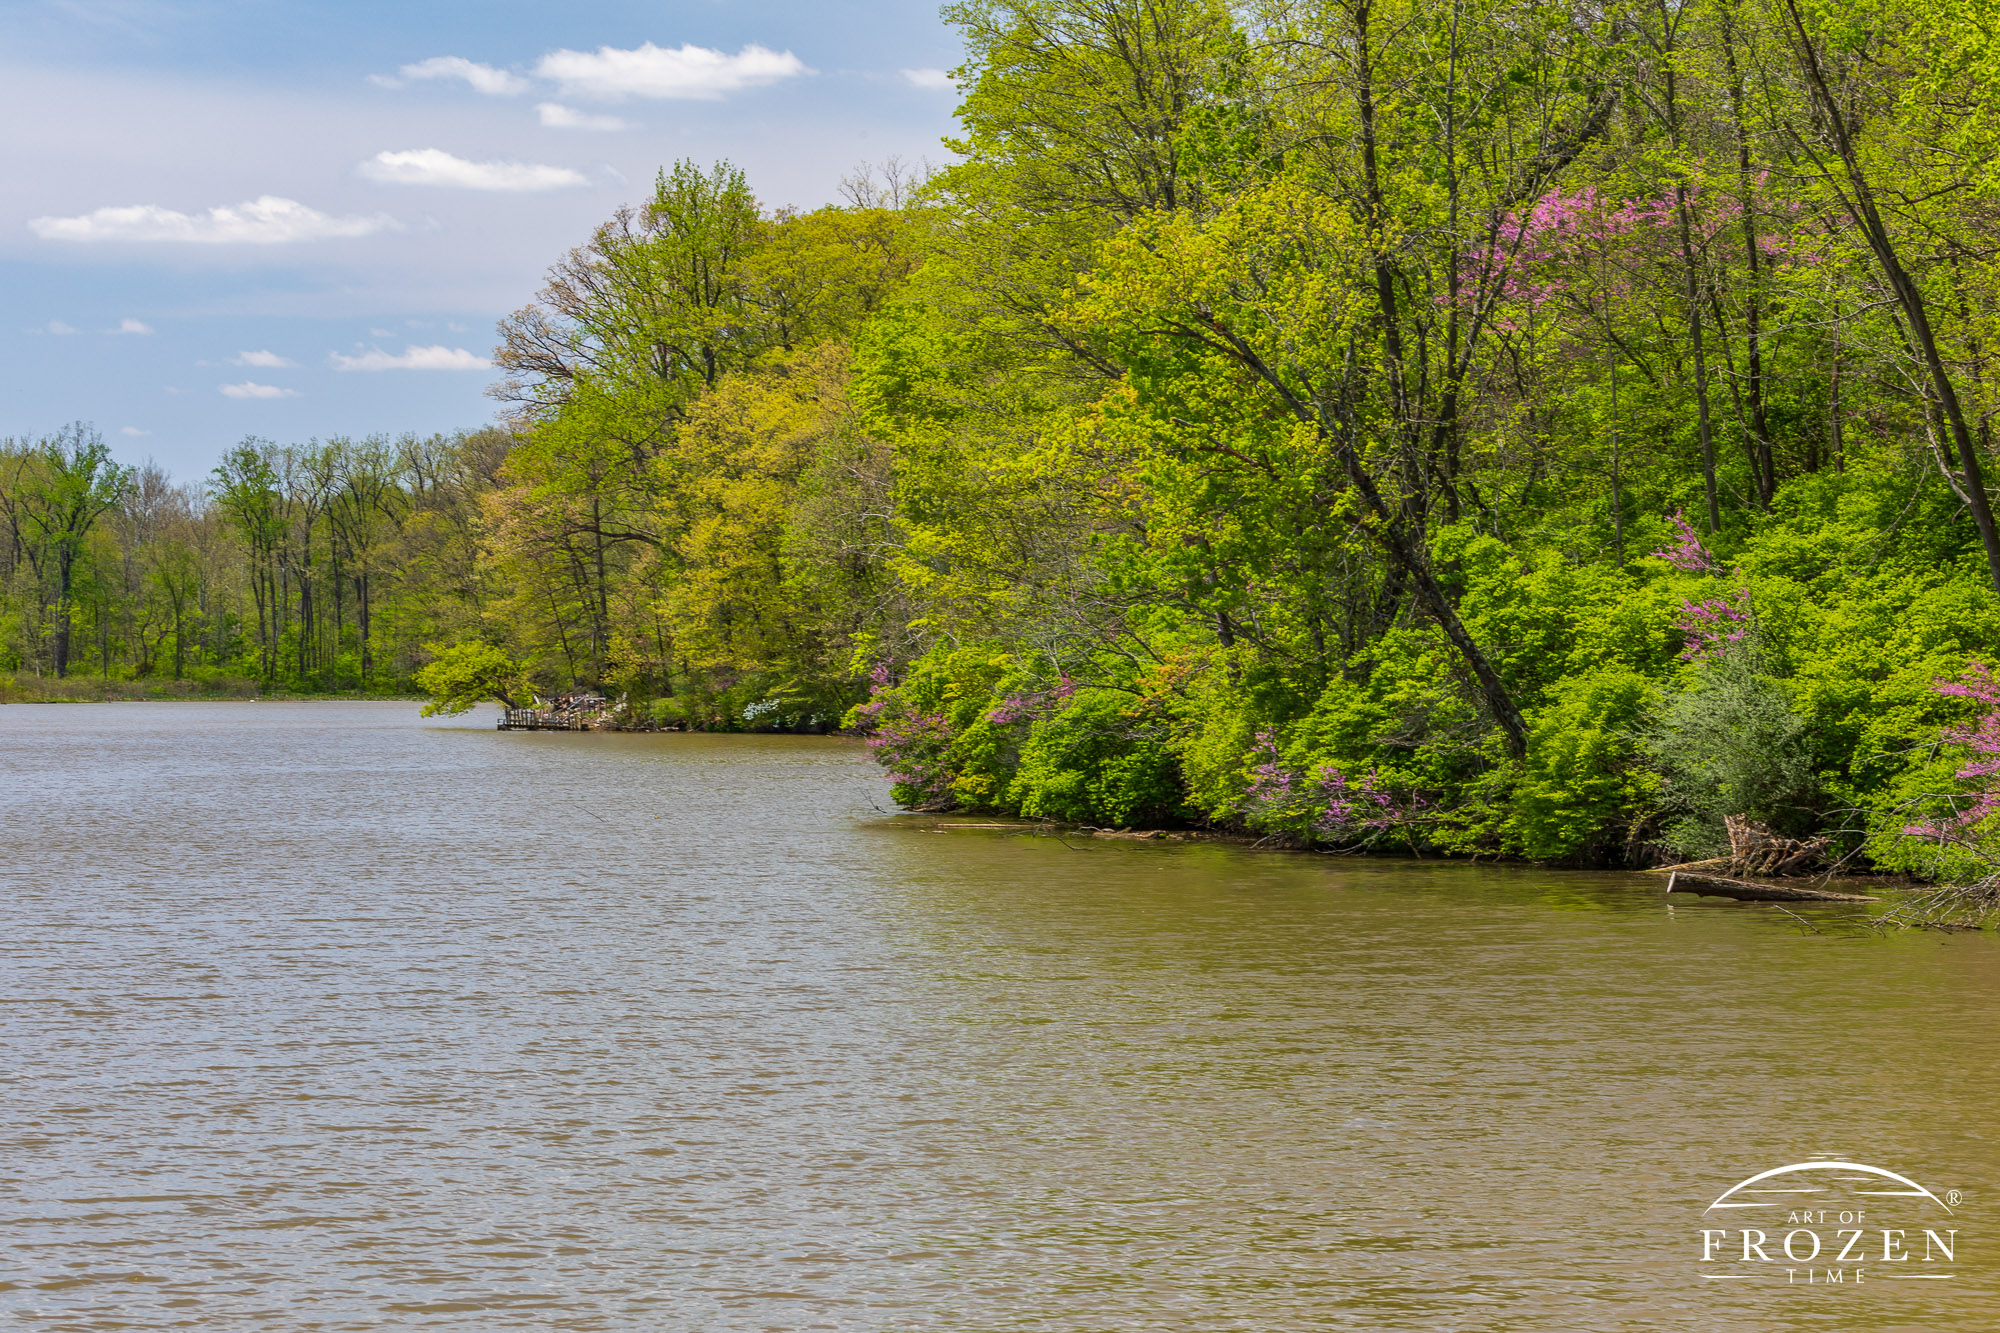 A springtime image of Swift Run Lake, a reservoir north of Piqua Ohio, whose shoreline feature pink Red Bud trees